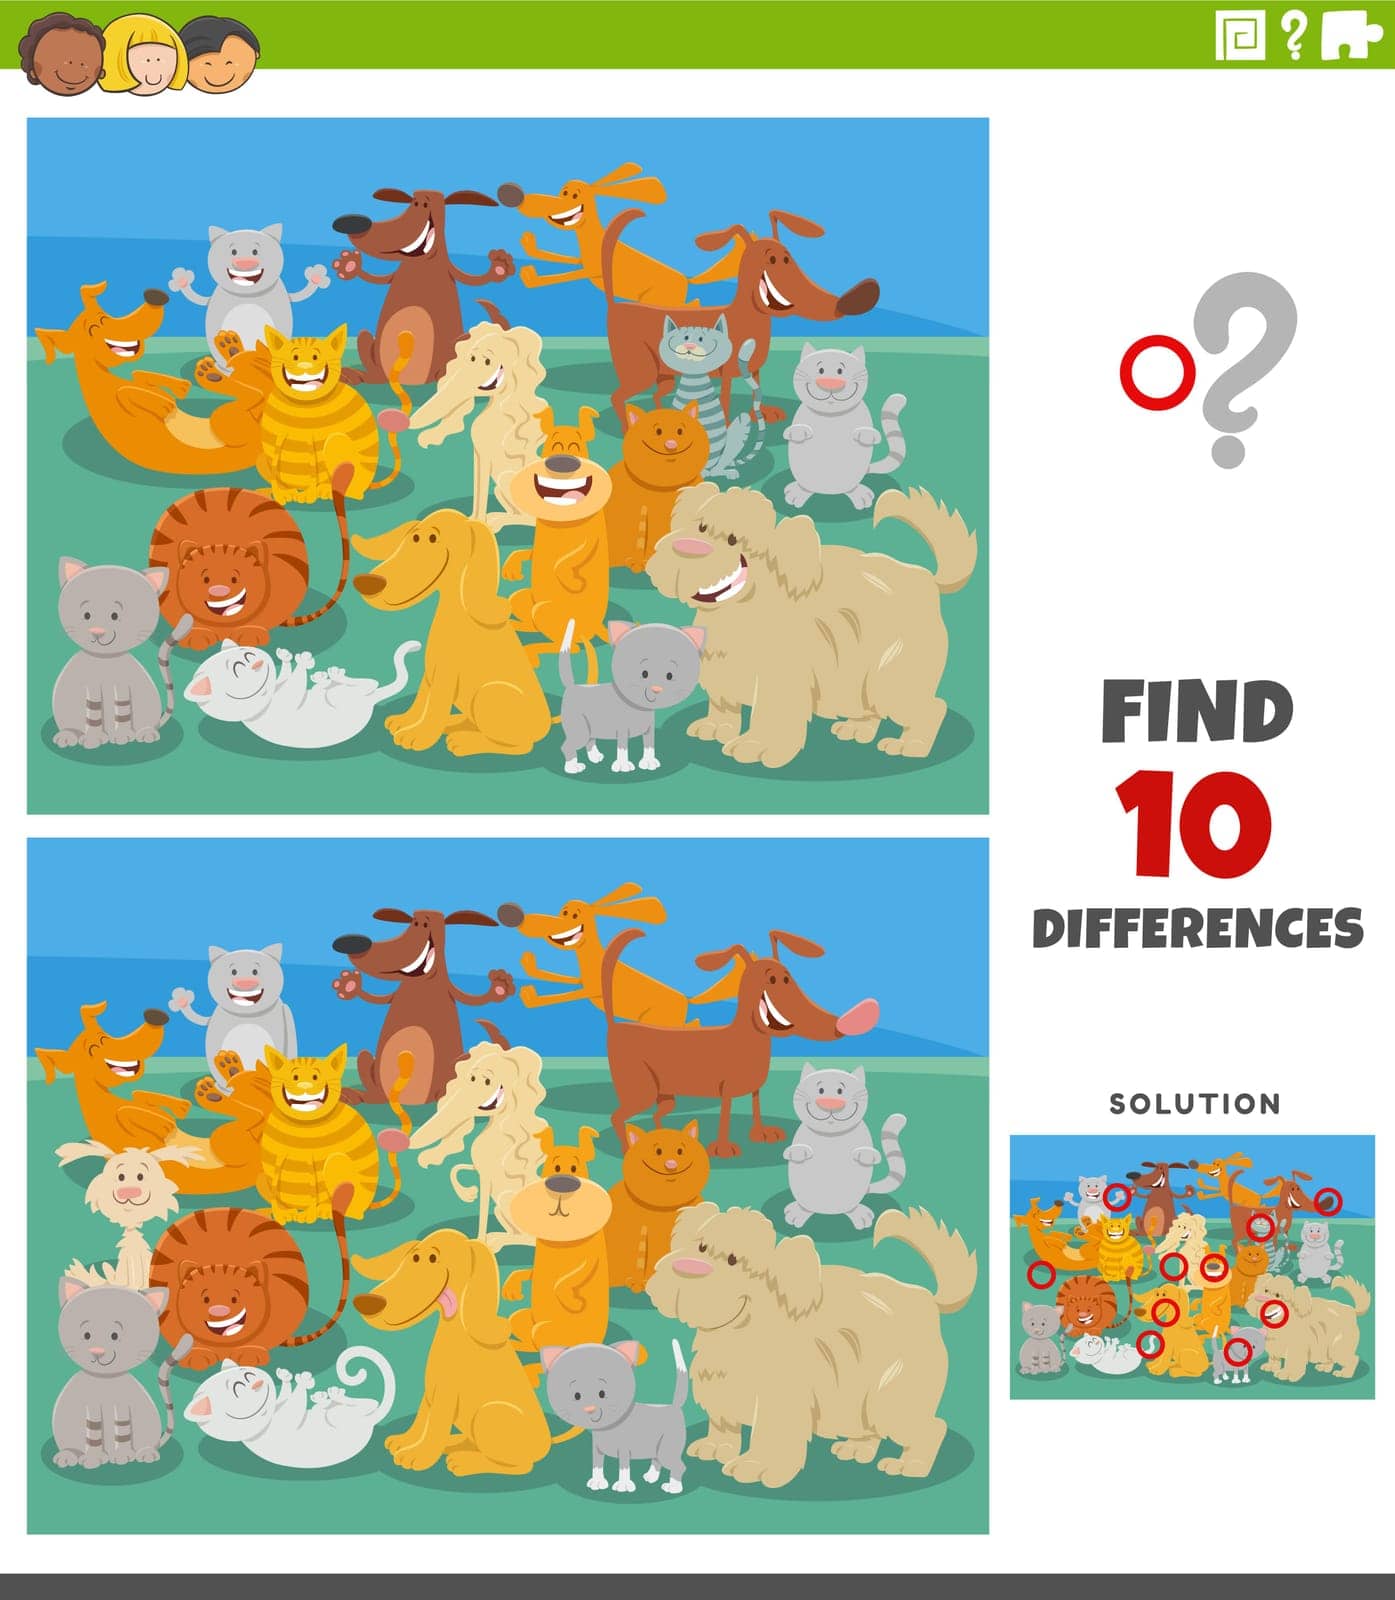 differences game with cartoon cats and dogs characters by izakowski